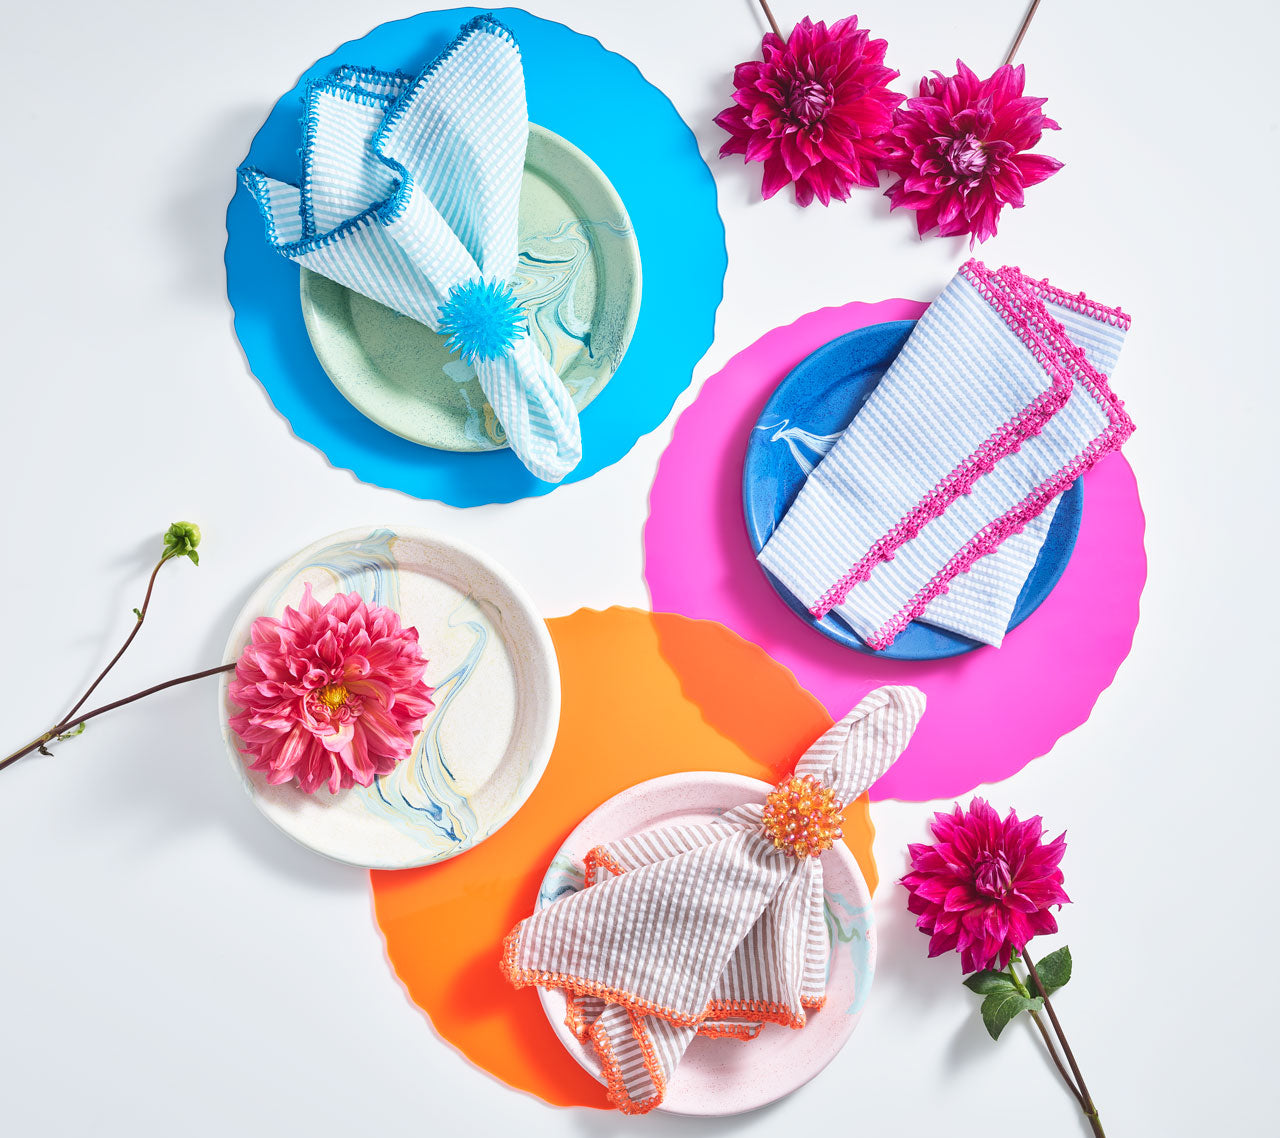 Kim Seybert's Acrylic Pop Placemats in Hot Pink, Orange and Blue are perfect for outdoor dining and entertaining.